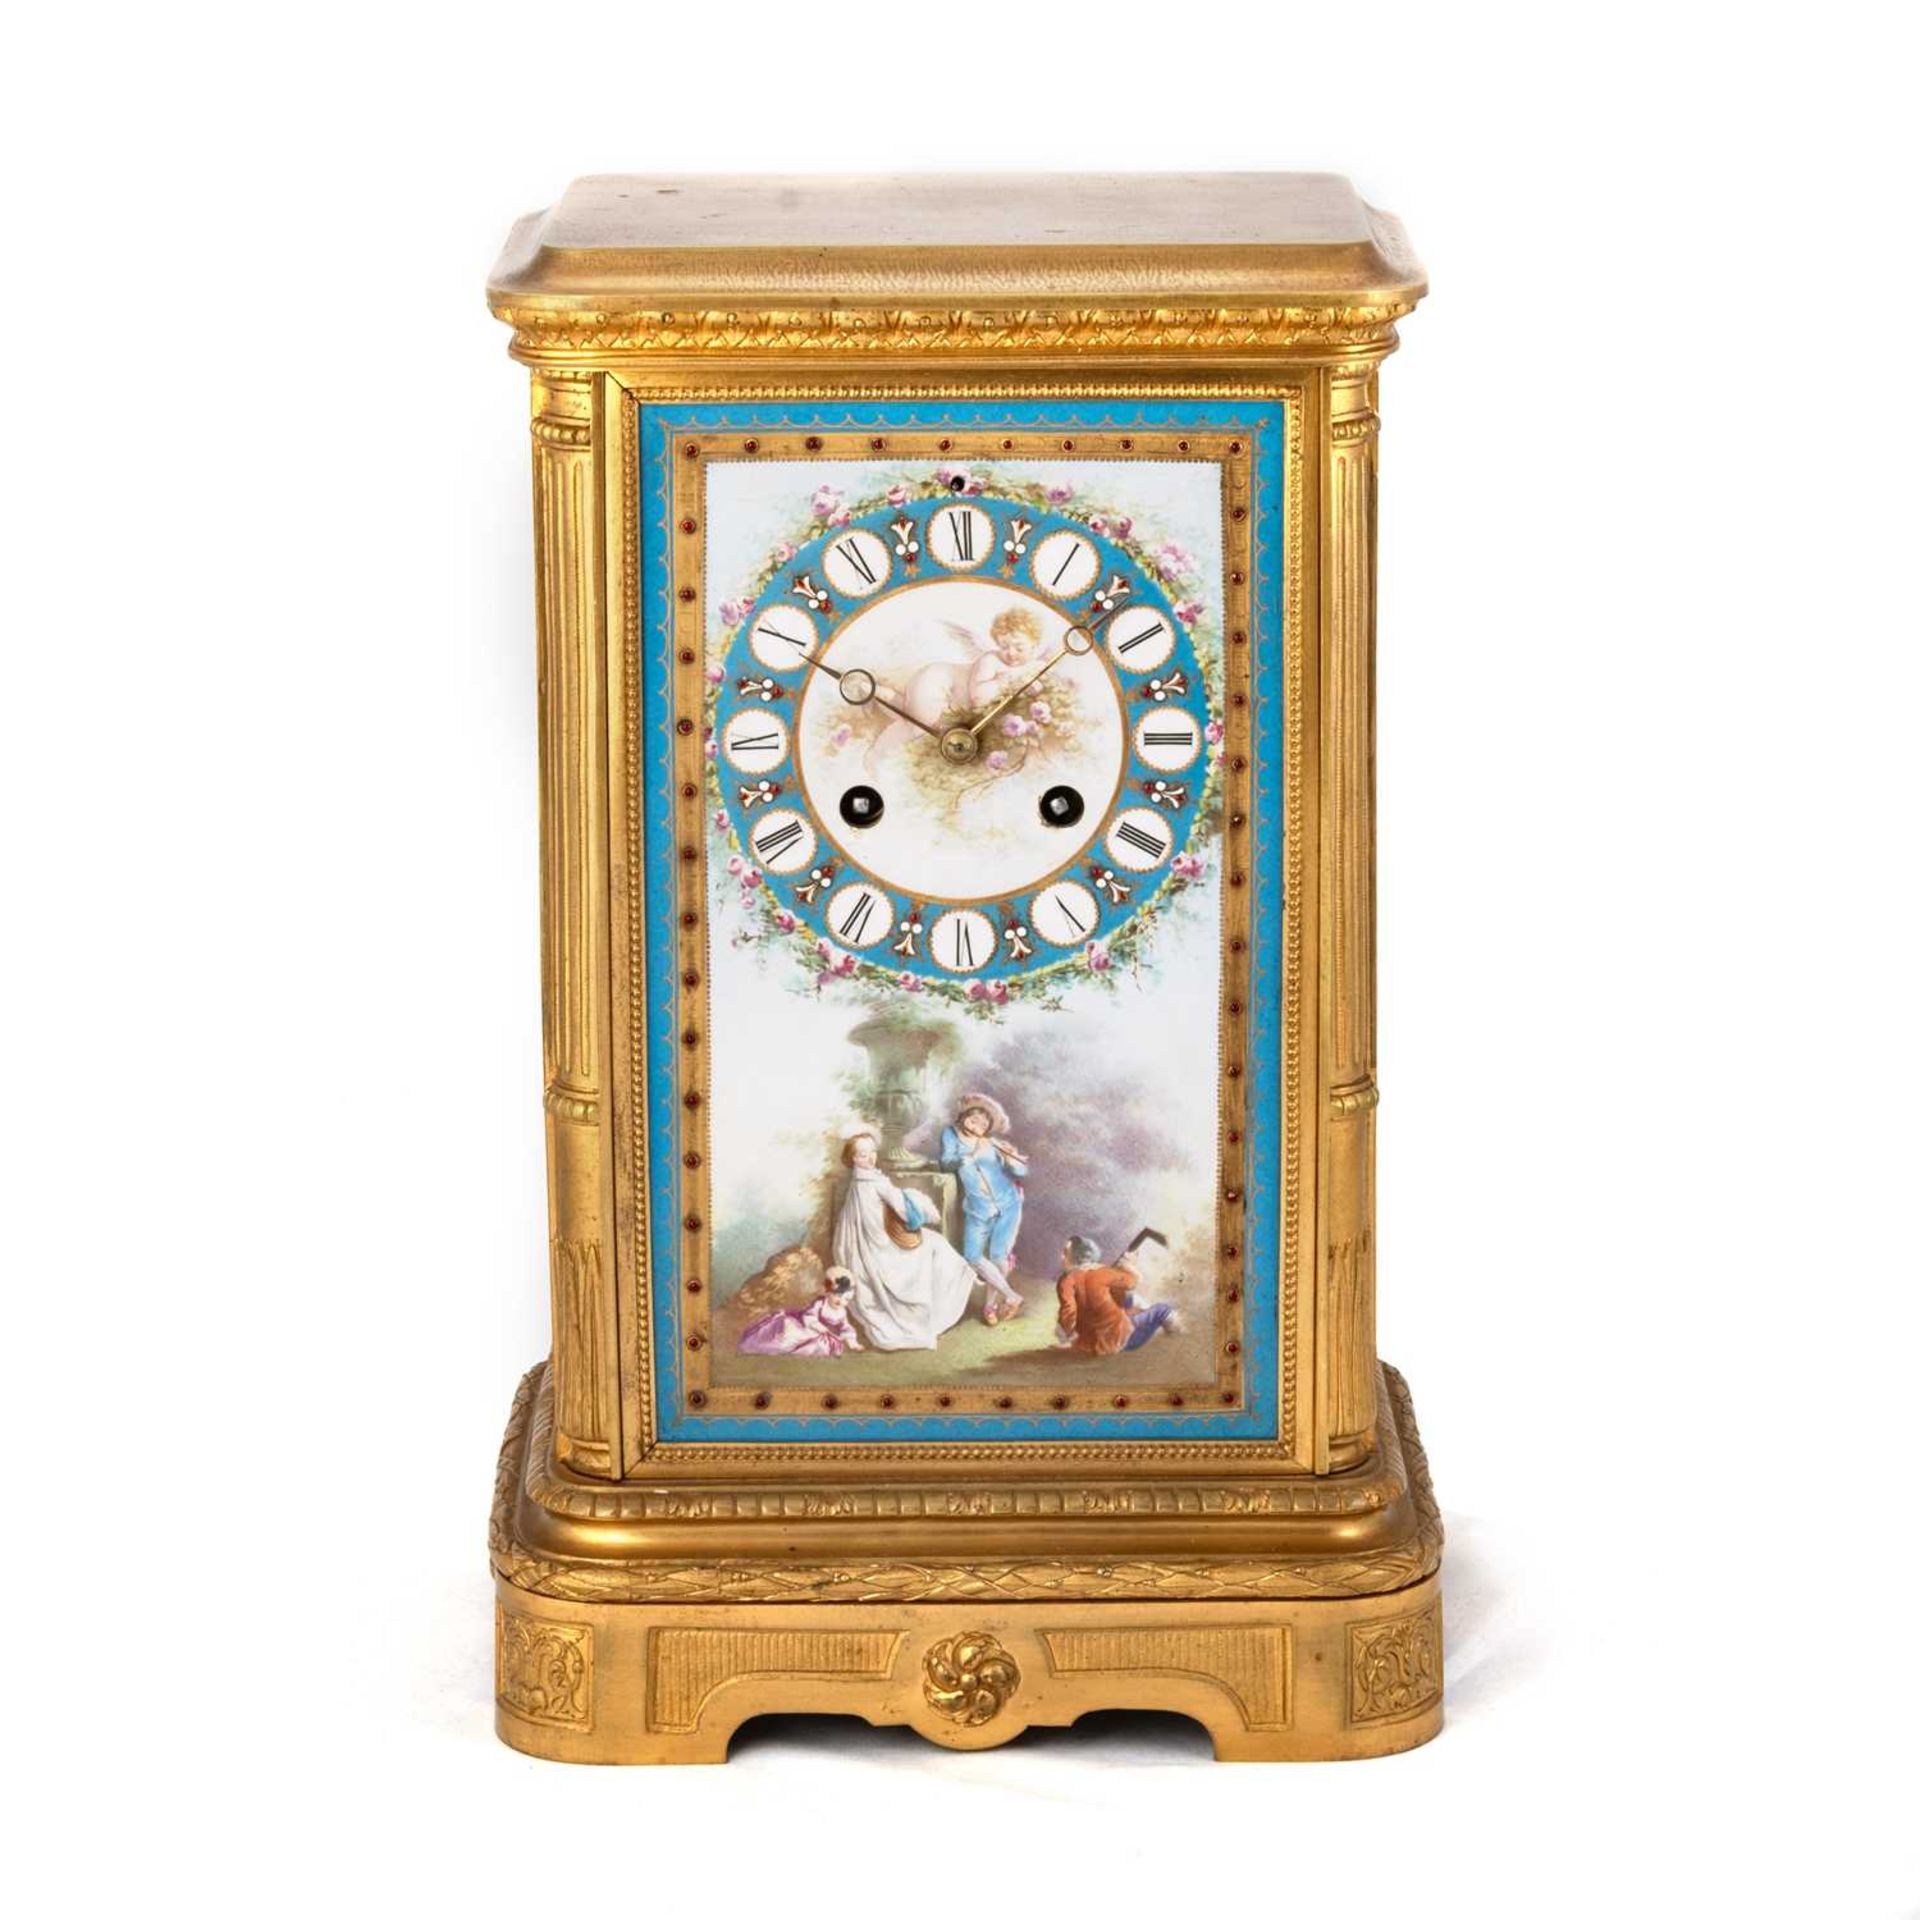 A LARGE FRENCH ORMOLU AND PORCELAIN TABLE CLOCK, CIRCA 1870, RETAILED BY TIFFANY & CO, NEW YORK - Image 2 of 3